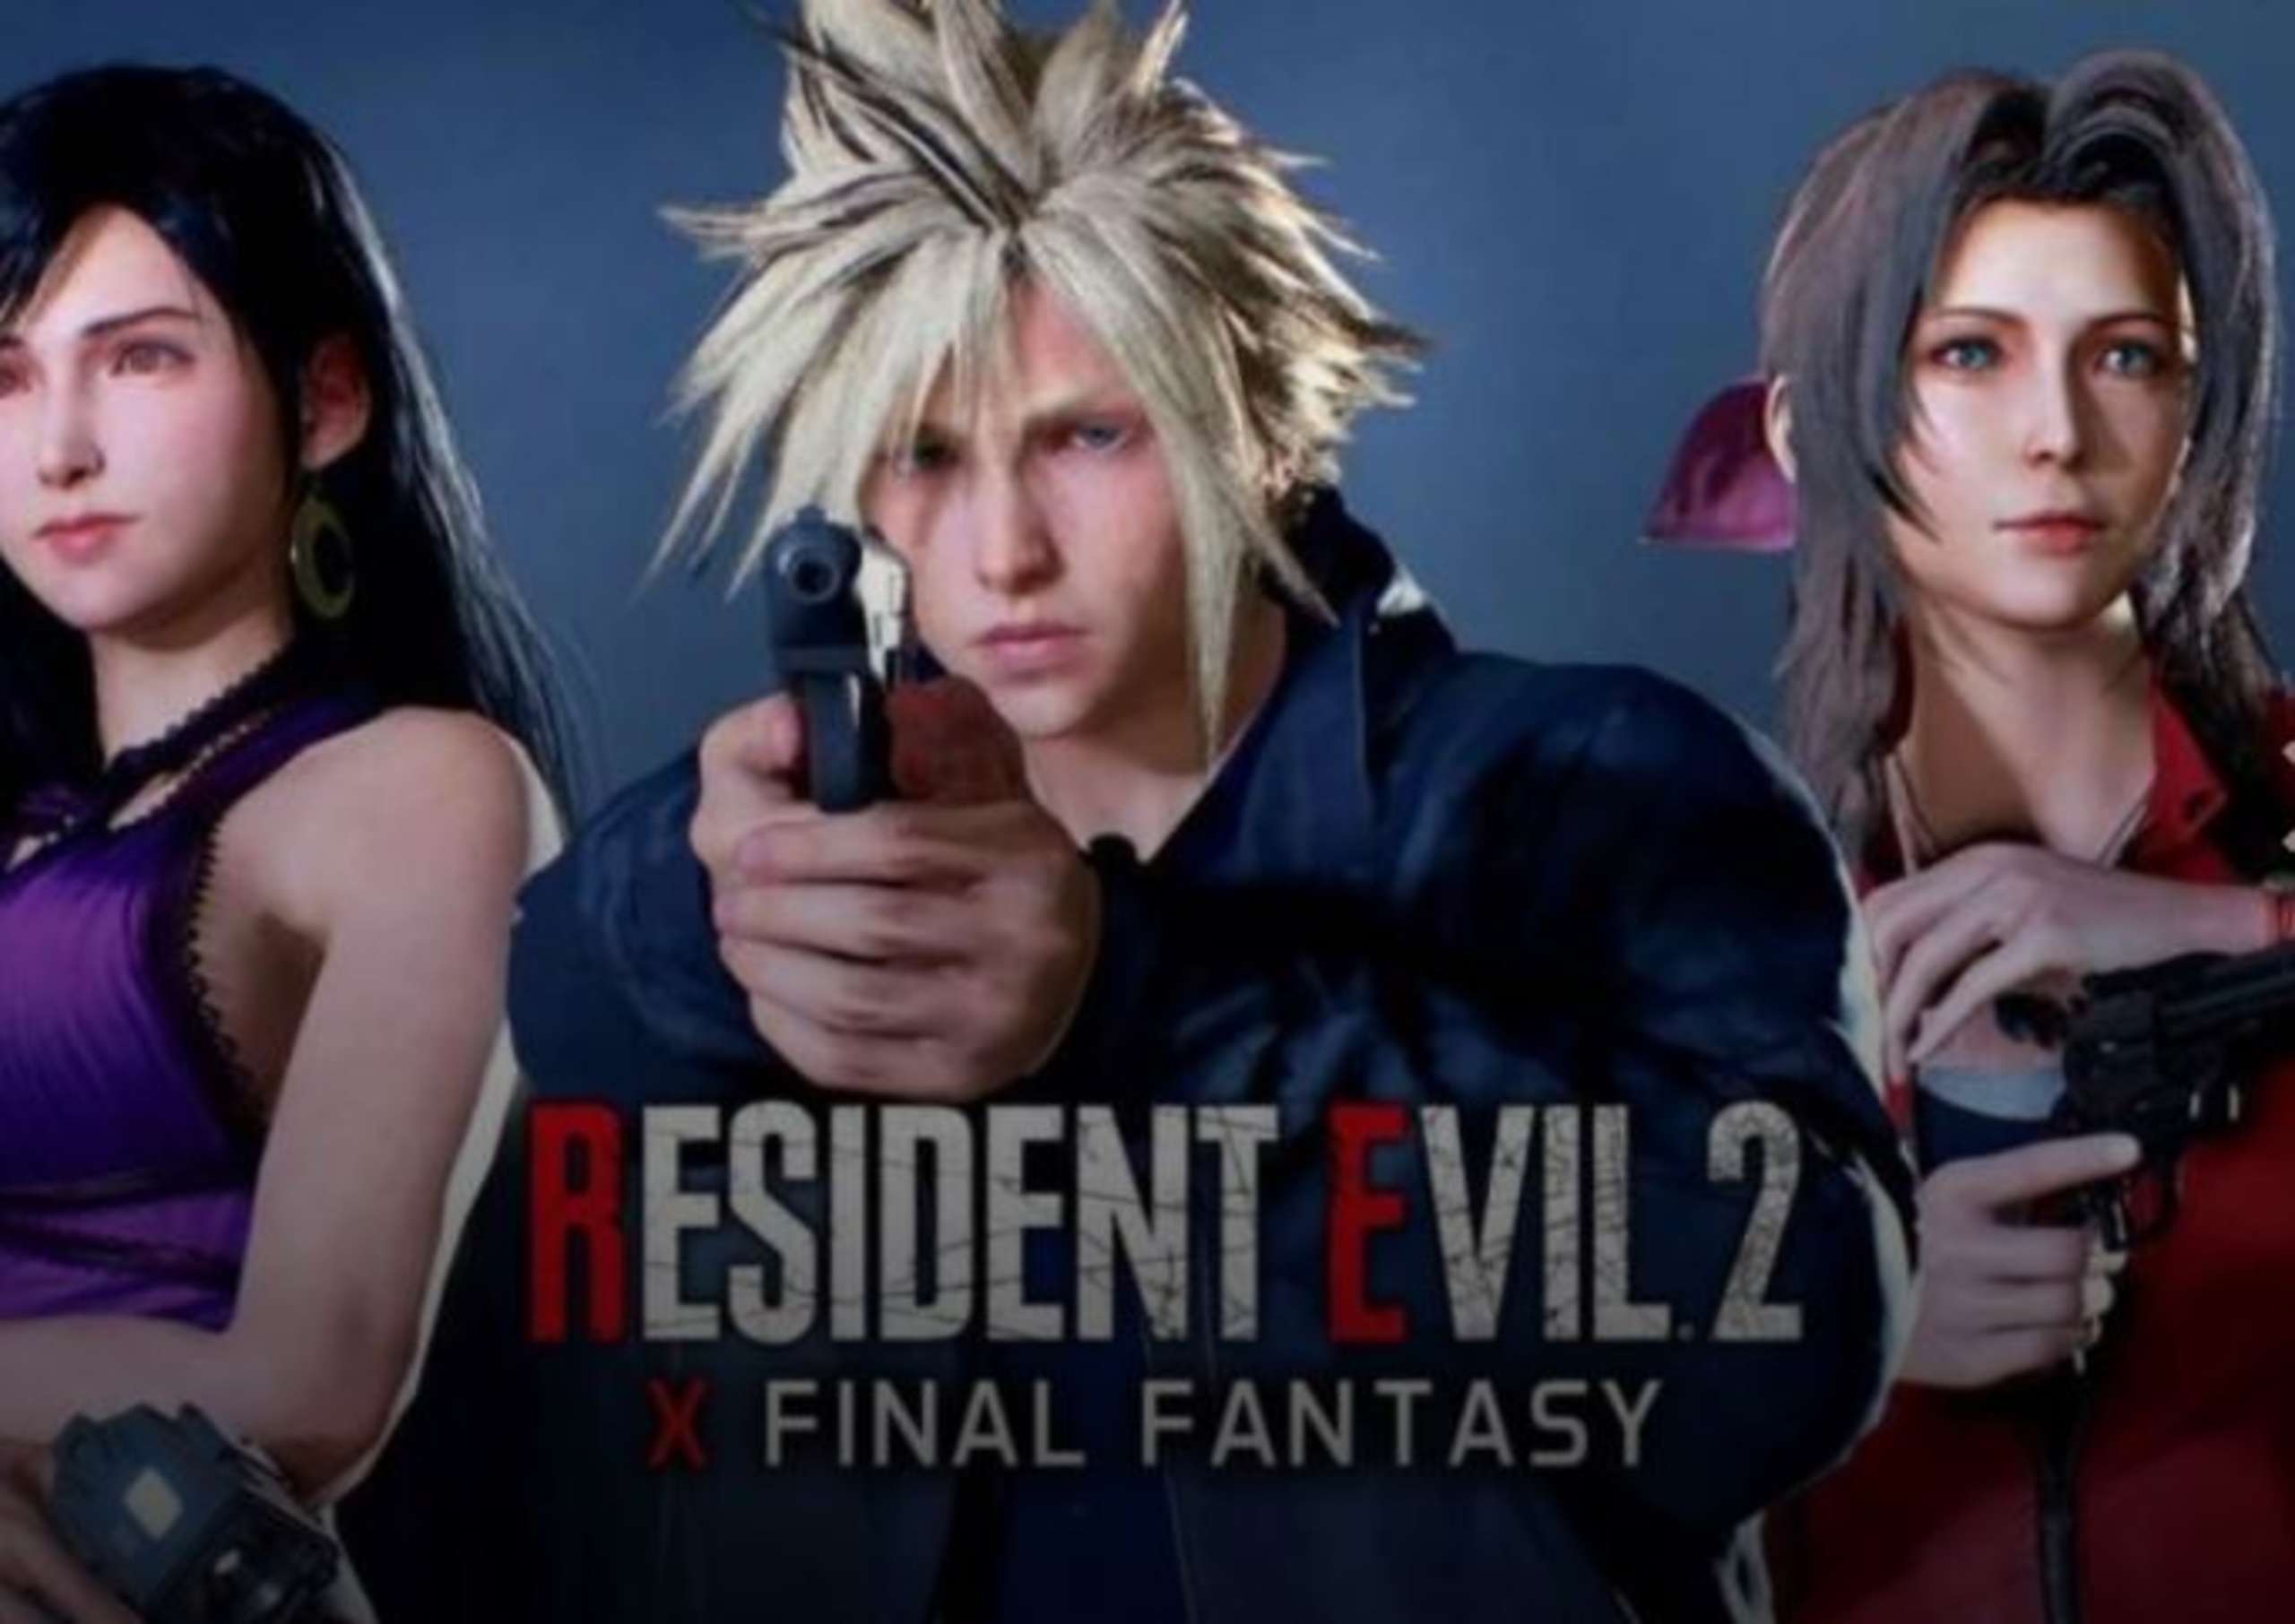 A Modder Changed Leon Kennedy From Resident Evil 2 To Cloud Strife From Final Fantasy 7, As Well As Aerith To Ada And Sephiroth To Mr. X